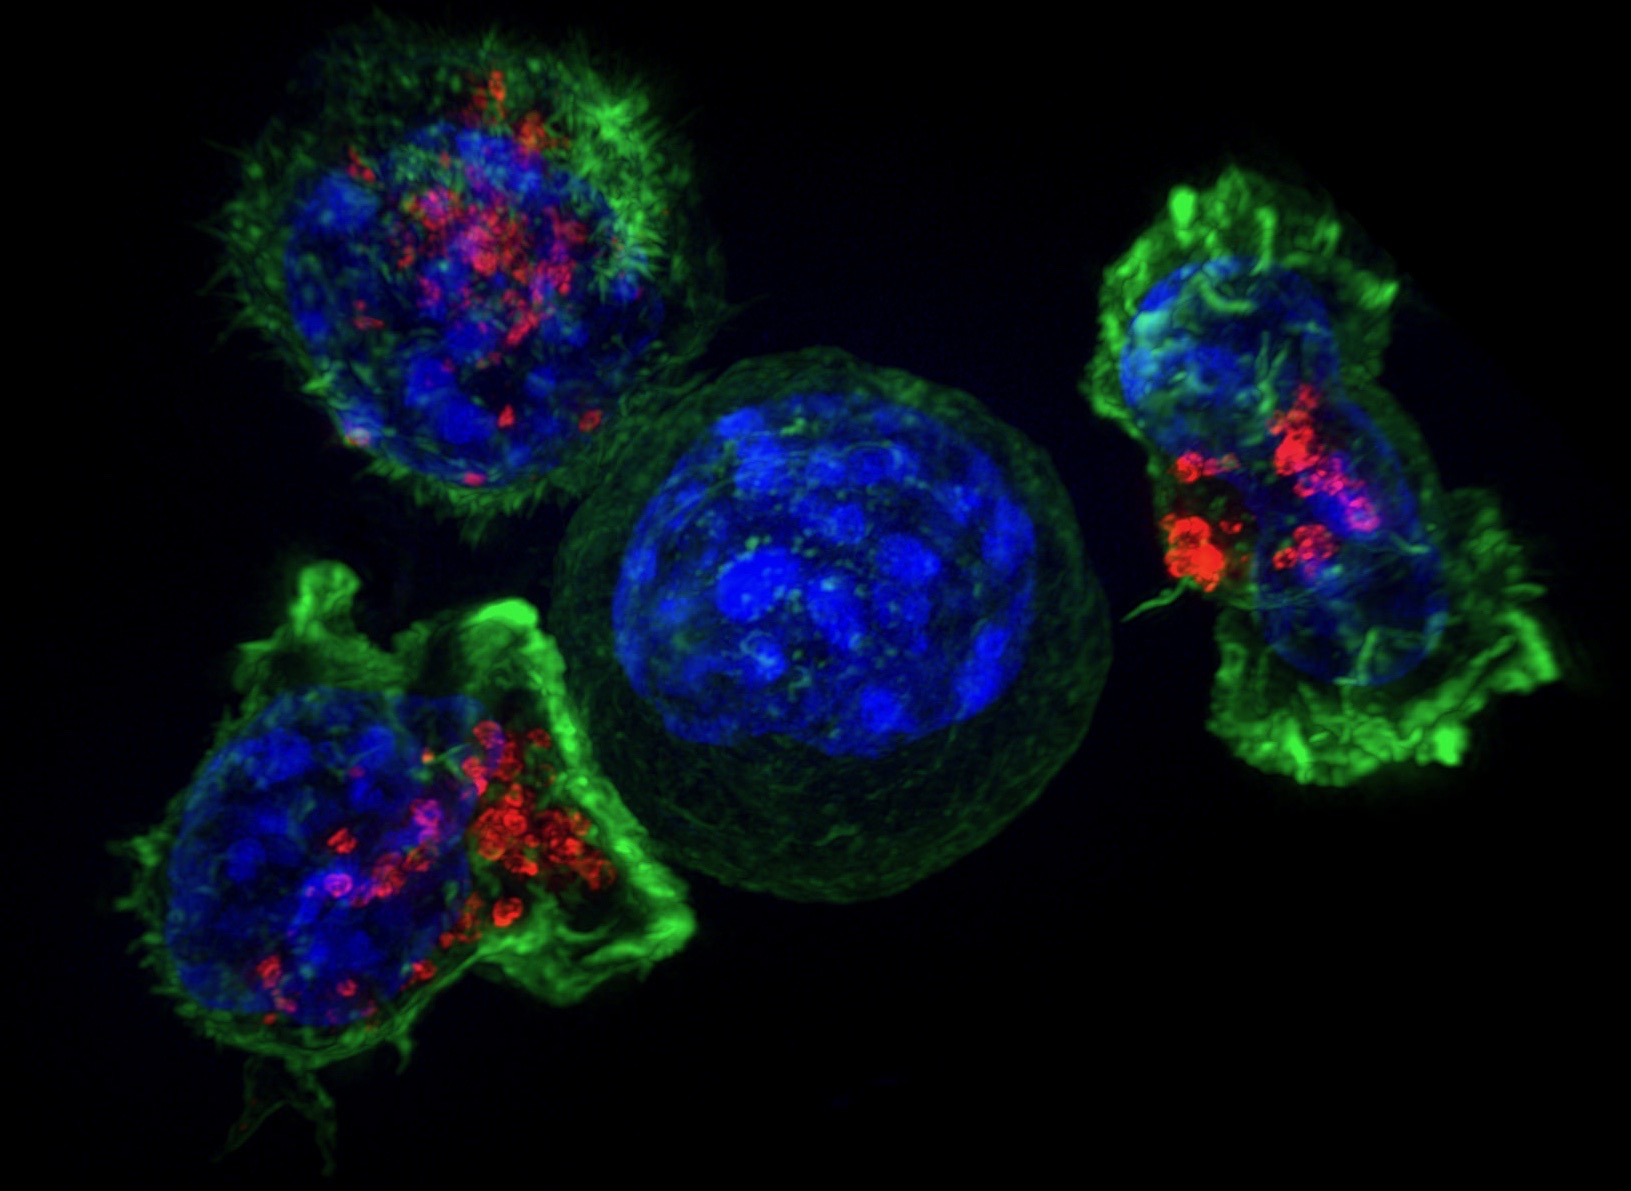 Killer T cells surround a cancer cell. Killer T cells are a type of immune cells that detect and remove unhealthy cells, including cancer cells and virus-infected cells.